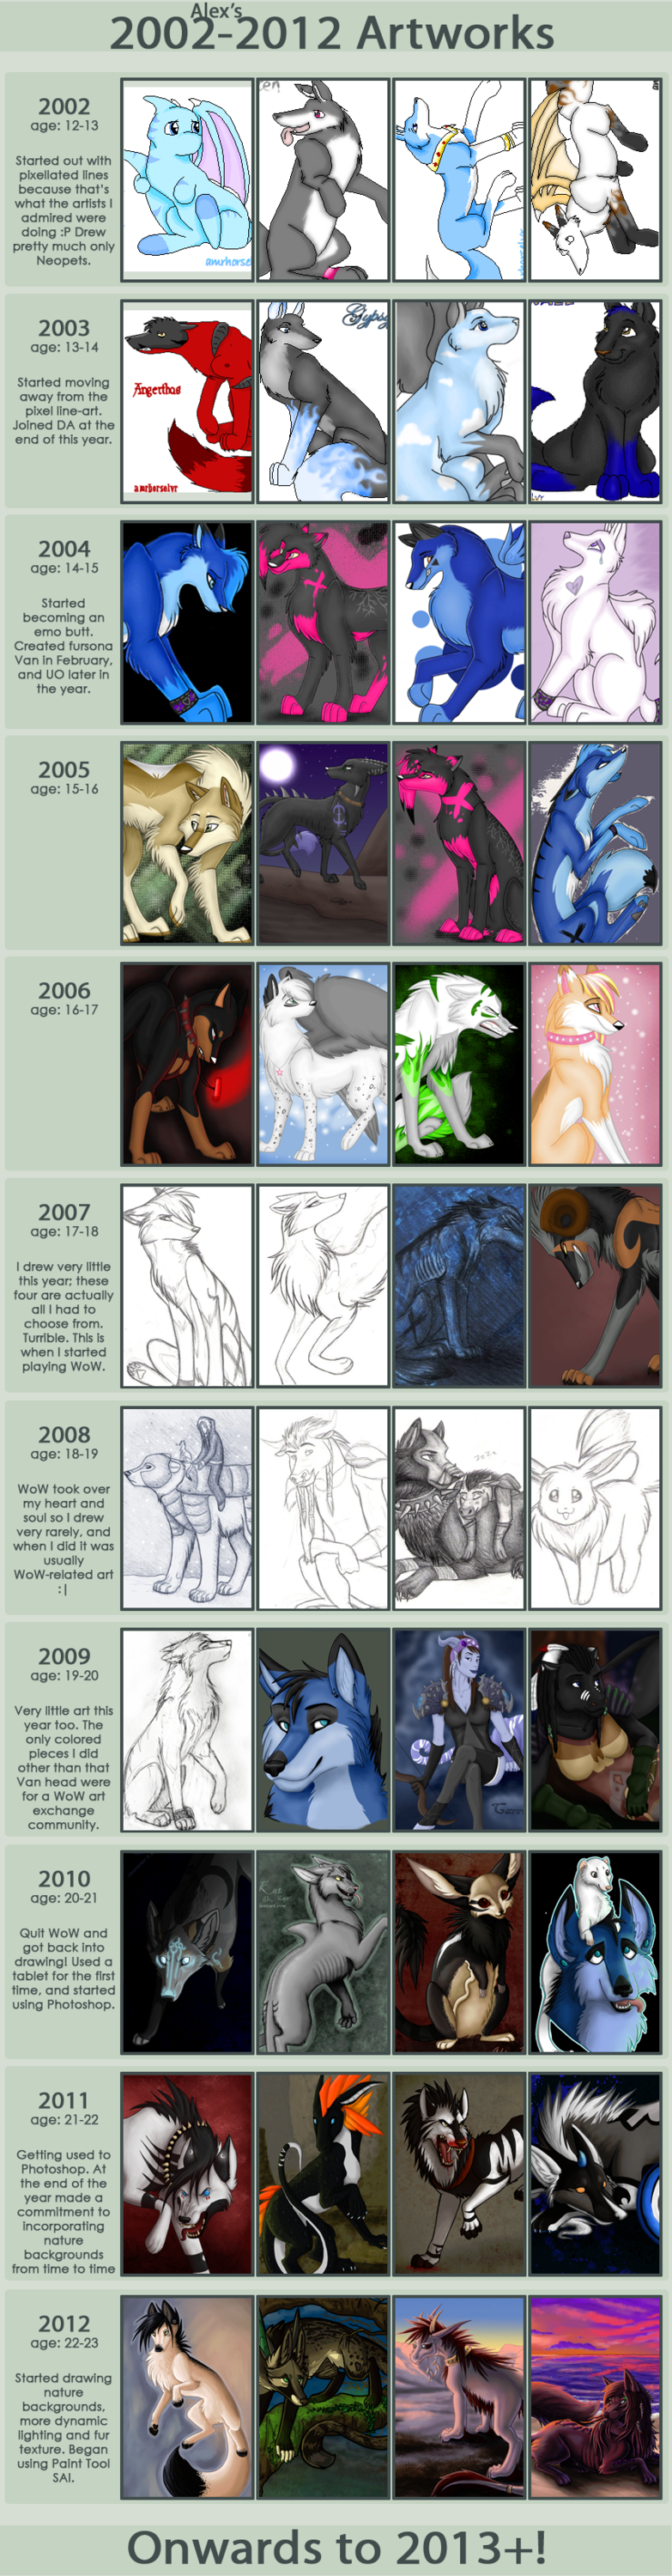 My art's evolution over the last 10 years